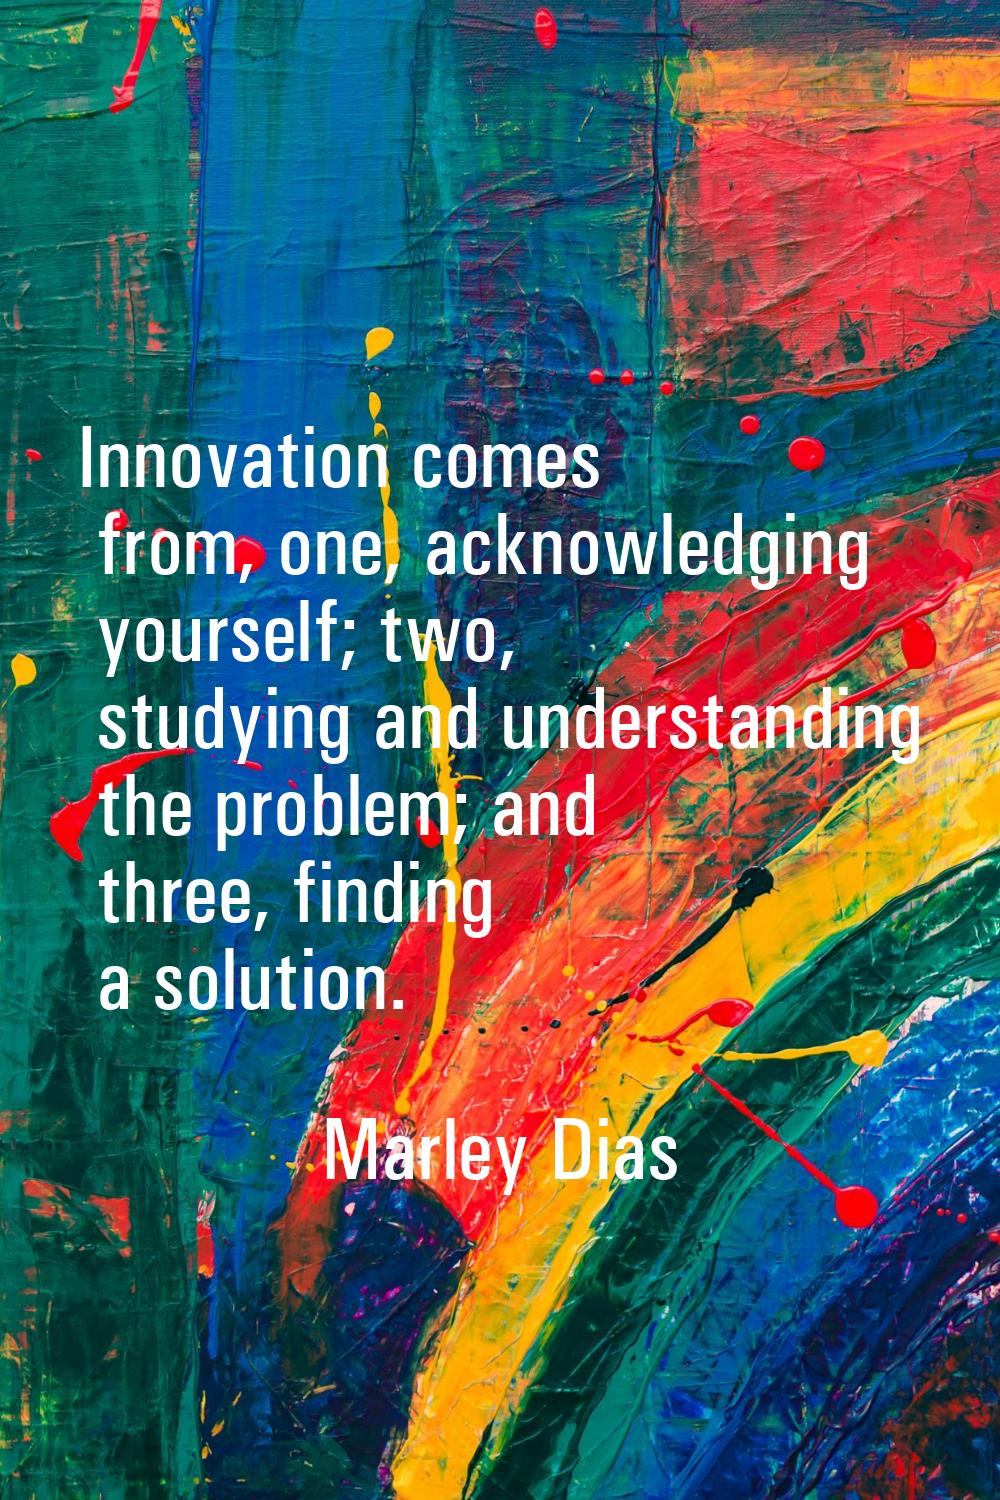 Innovation comes from, one, acknowledging yourself; two, studying and understanding the problem; an